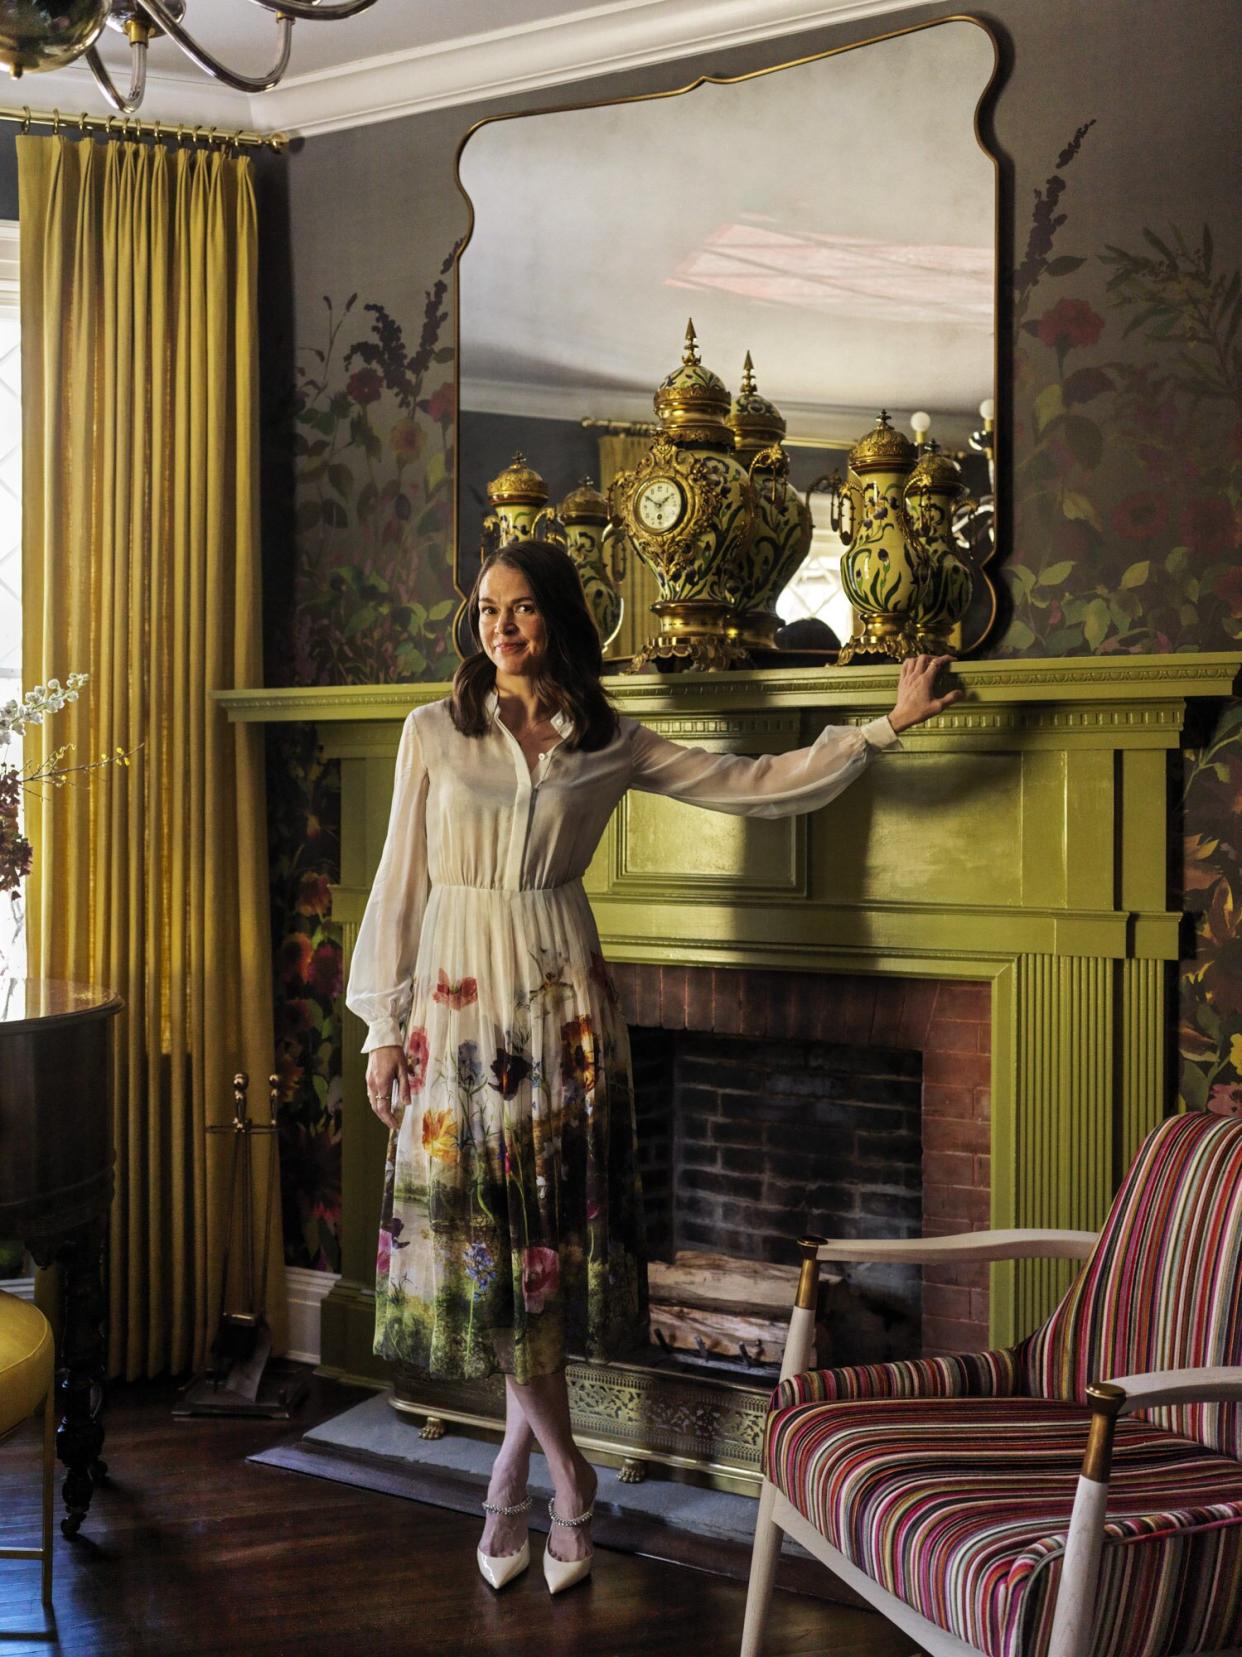 Sutton Foster and her Greenwood Lake home photographed for Architectural Digest